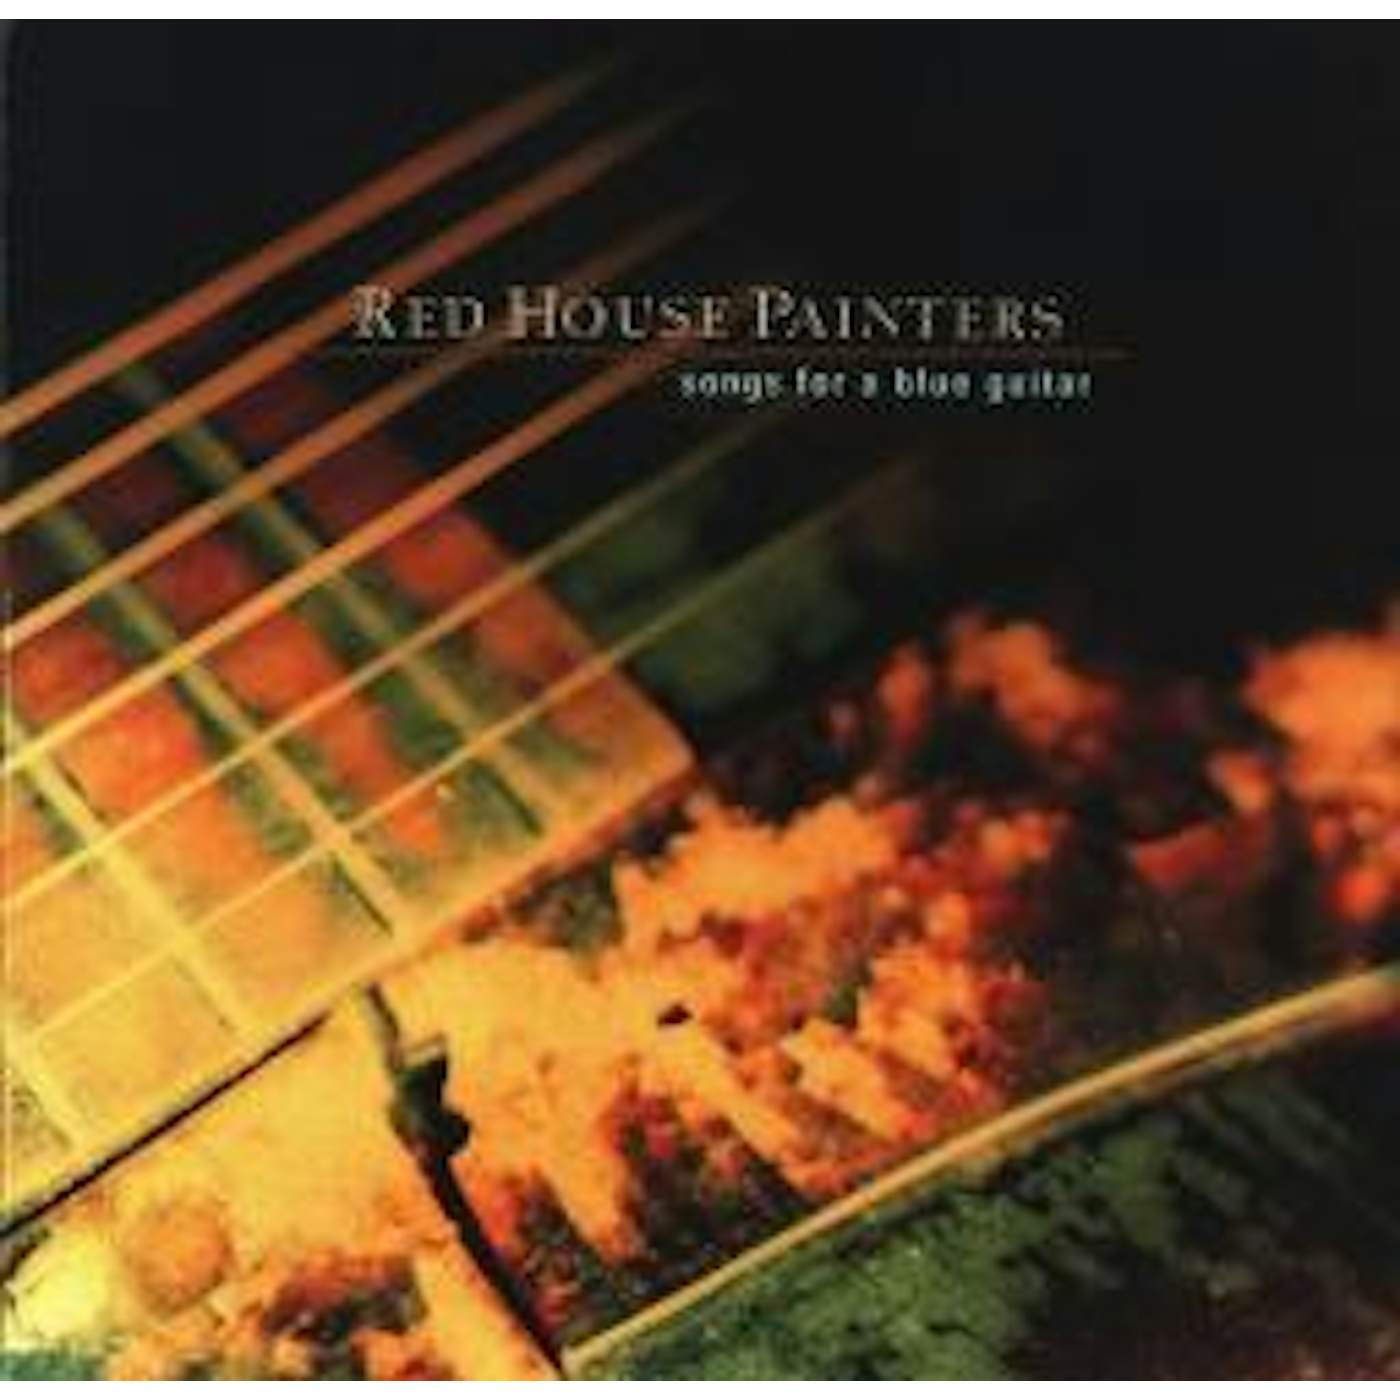 Red House Painters Songs For A Blue Guitar Vinyl Record